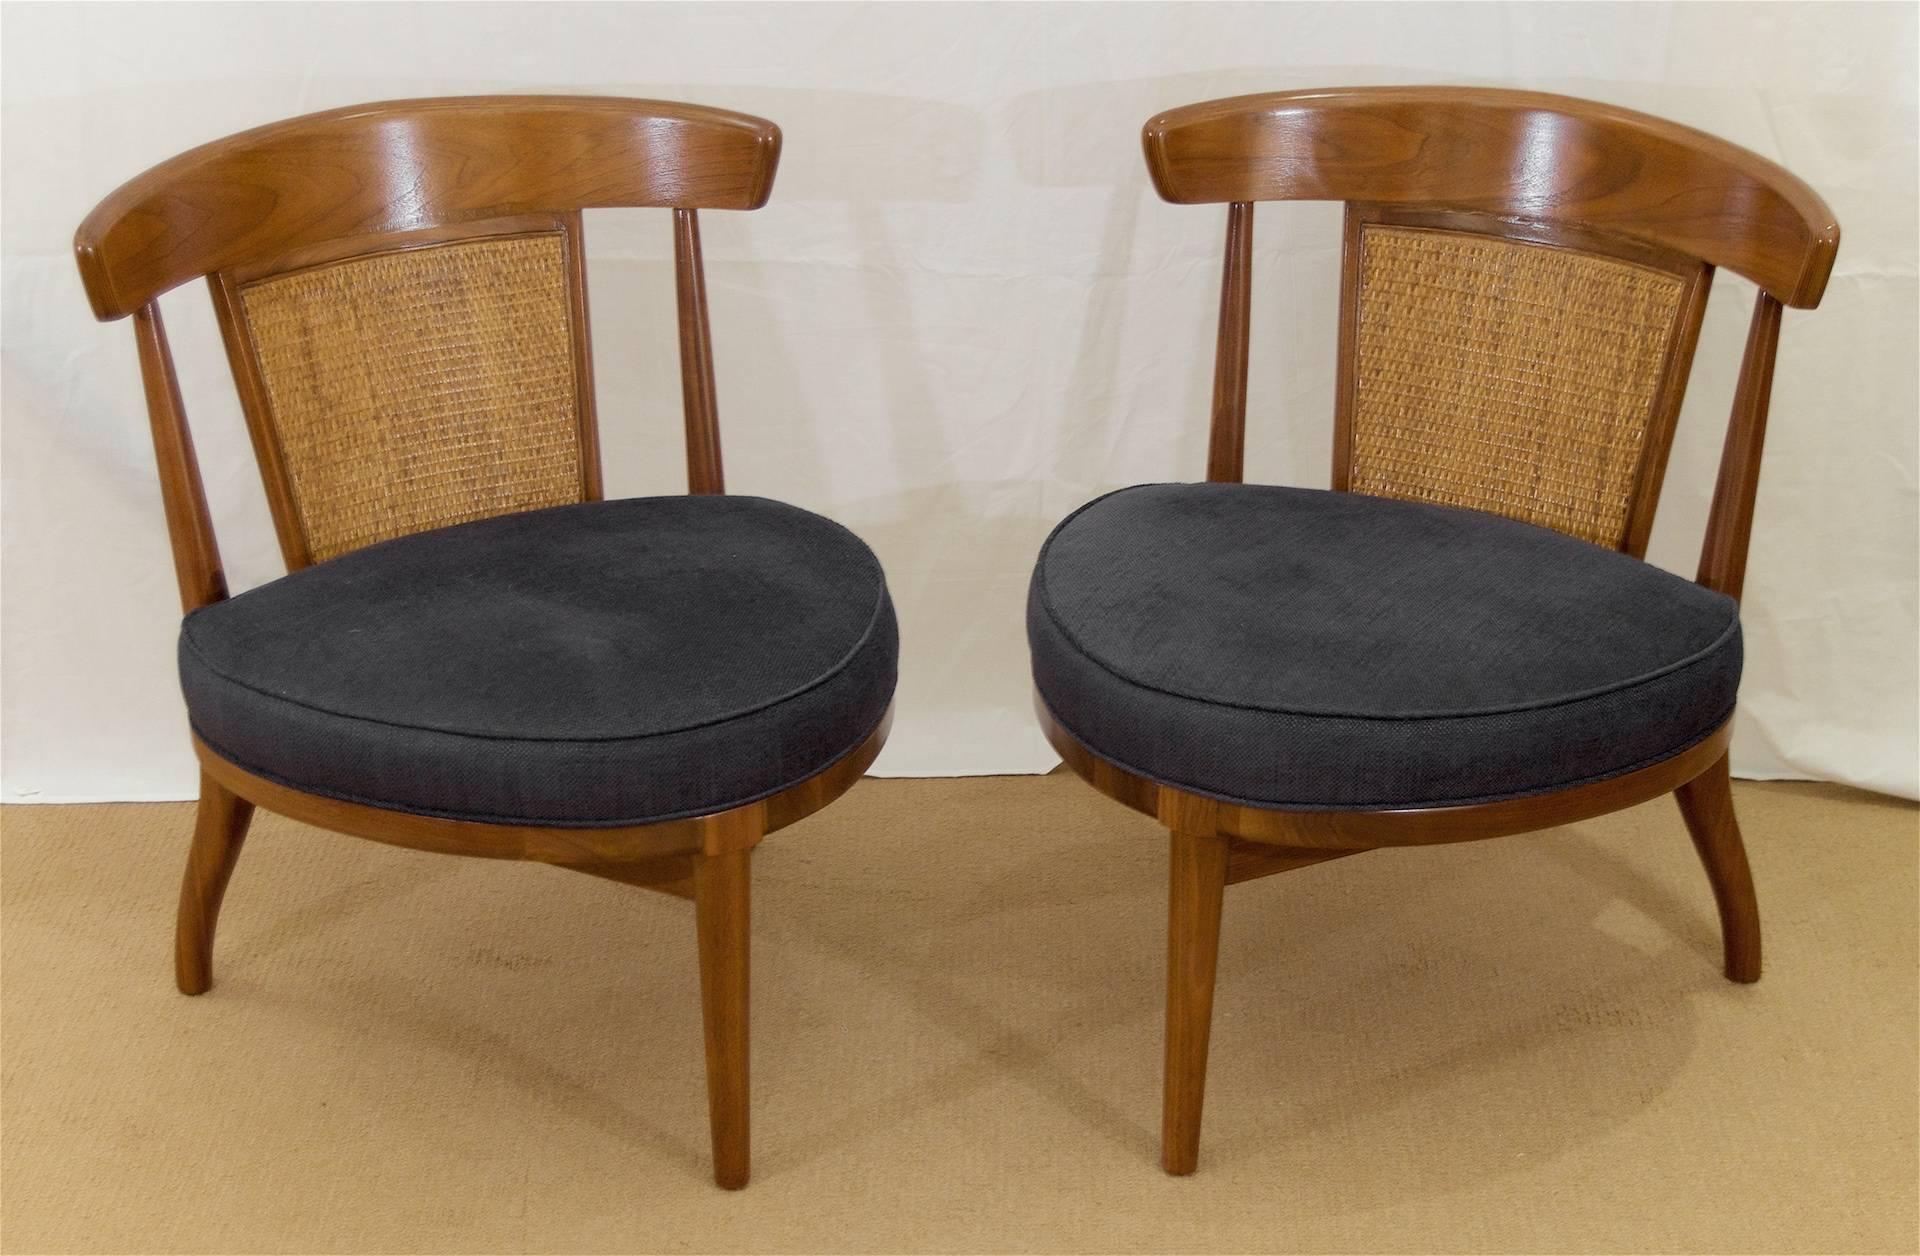 A pair of elegant wooden three-legged slipper chairs by Drexel Heritage. Each chair has a curved back with a caned panel. New dark charcoal tone Kravet upholstery